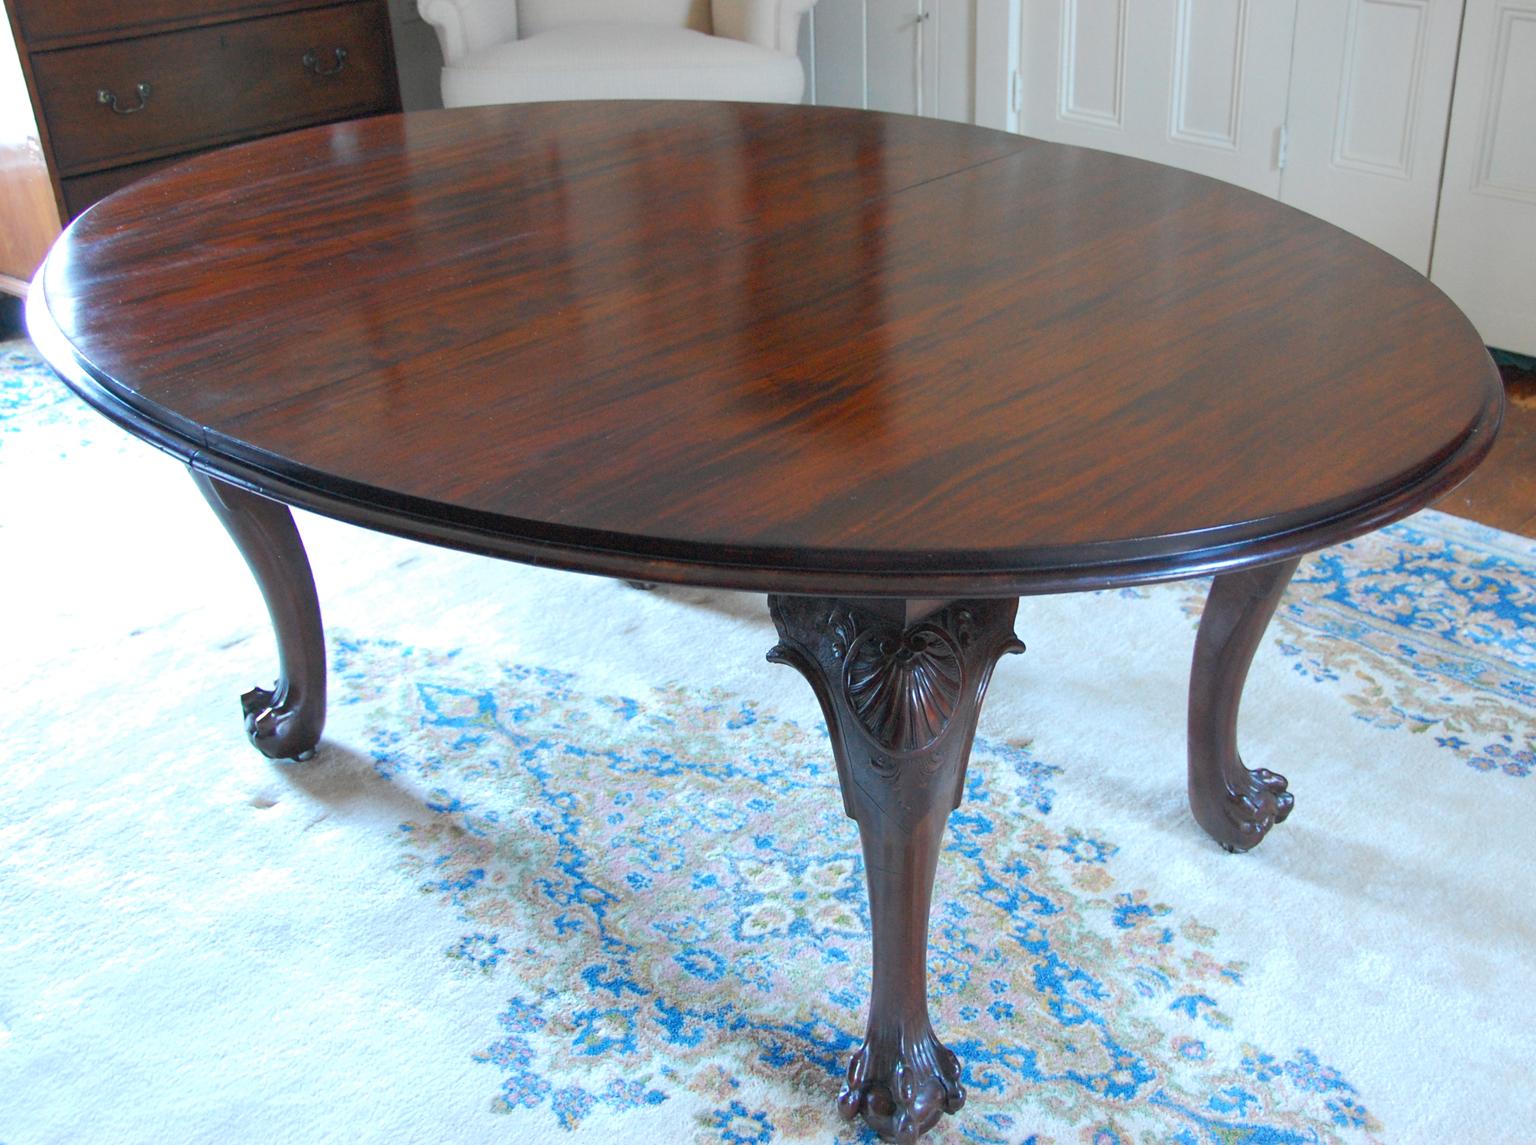 English Chippendale style solid mahogany banquet table with four leaves, carved cabriole legs and paw feet, continuous screw mechanism with crank for easily expanding or contracting the table, circa 1890-1900. Top constructed in part from 18th